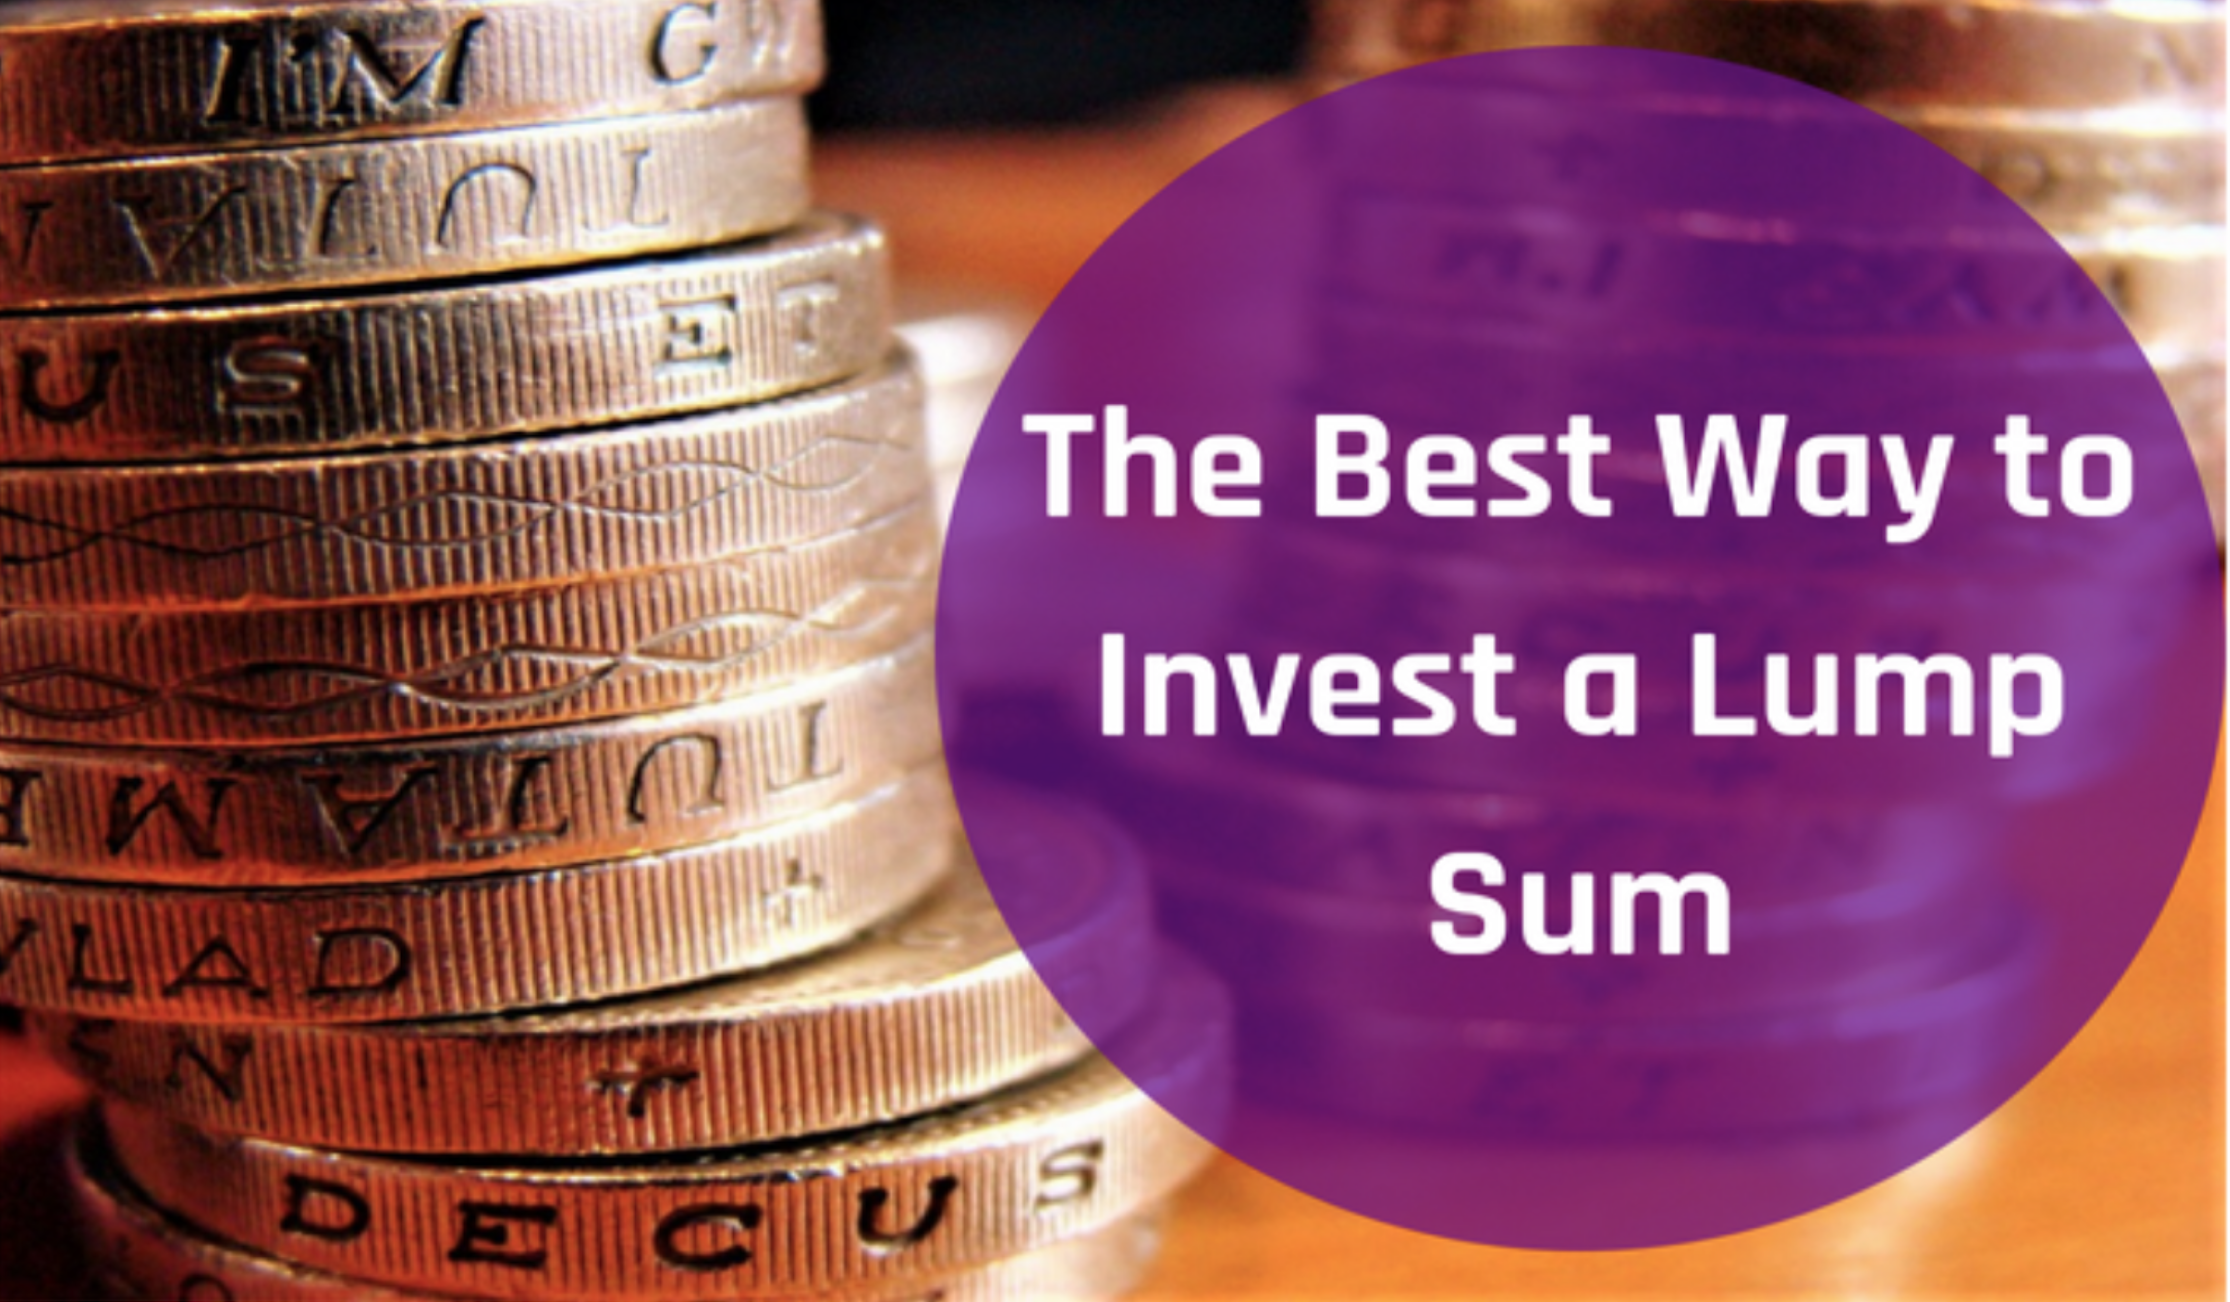 What Do I do With My Lump Sum? Pound Cost Averaging or All at Once